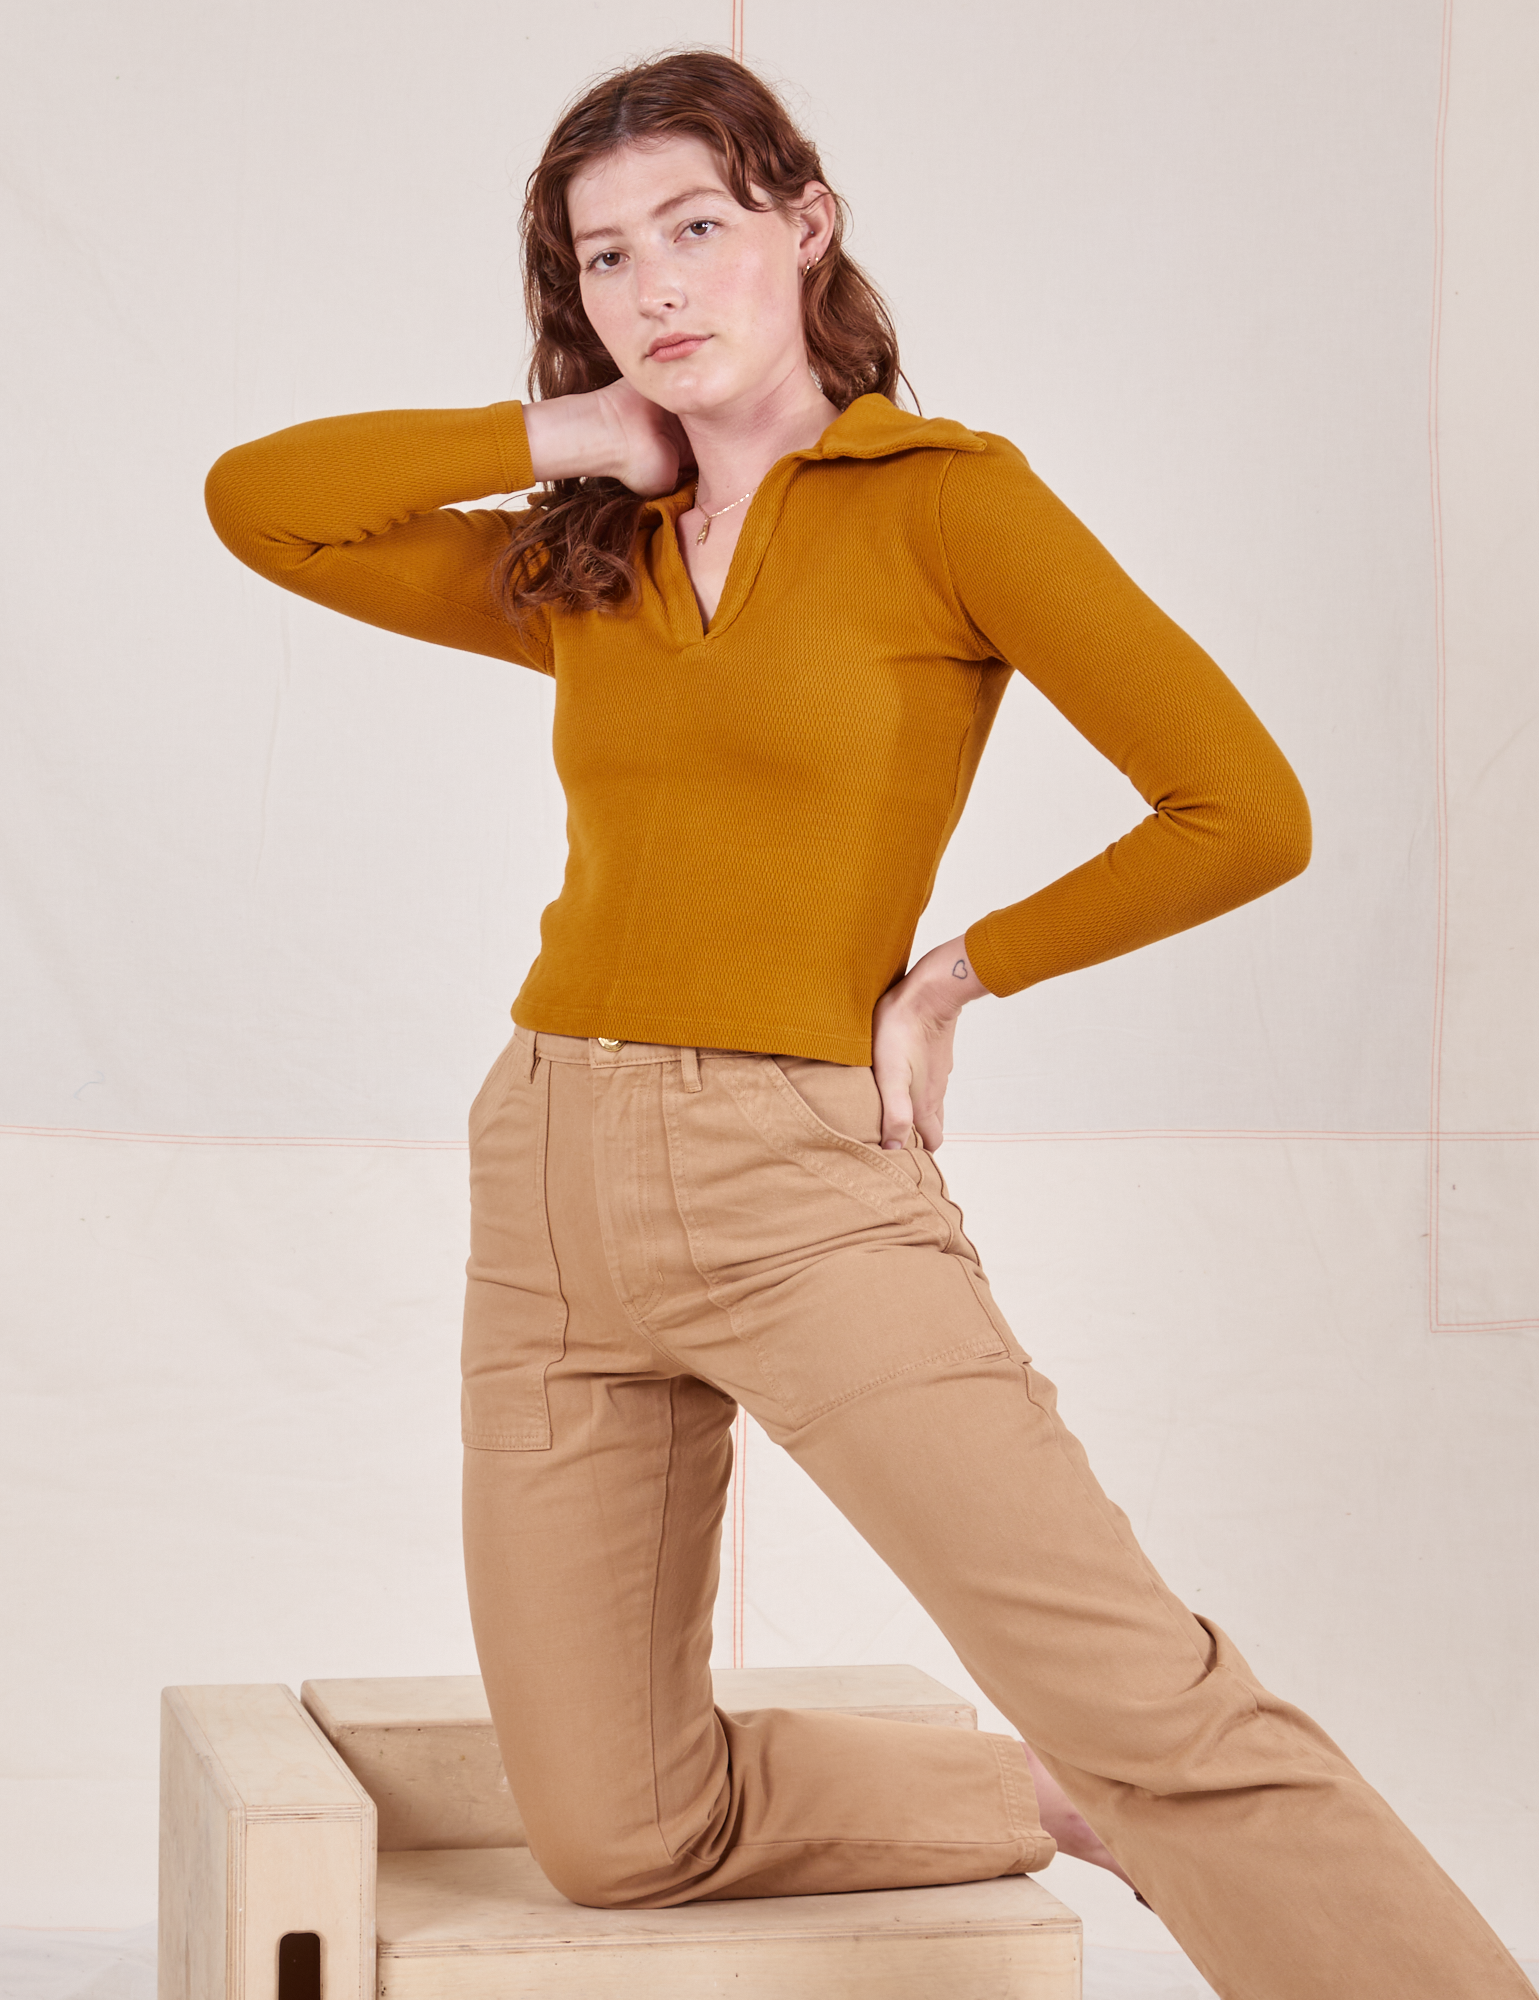 Alex is wearing Long Sleeve Fisherman Polo in Spicy Mustard and tan Work Pants